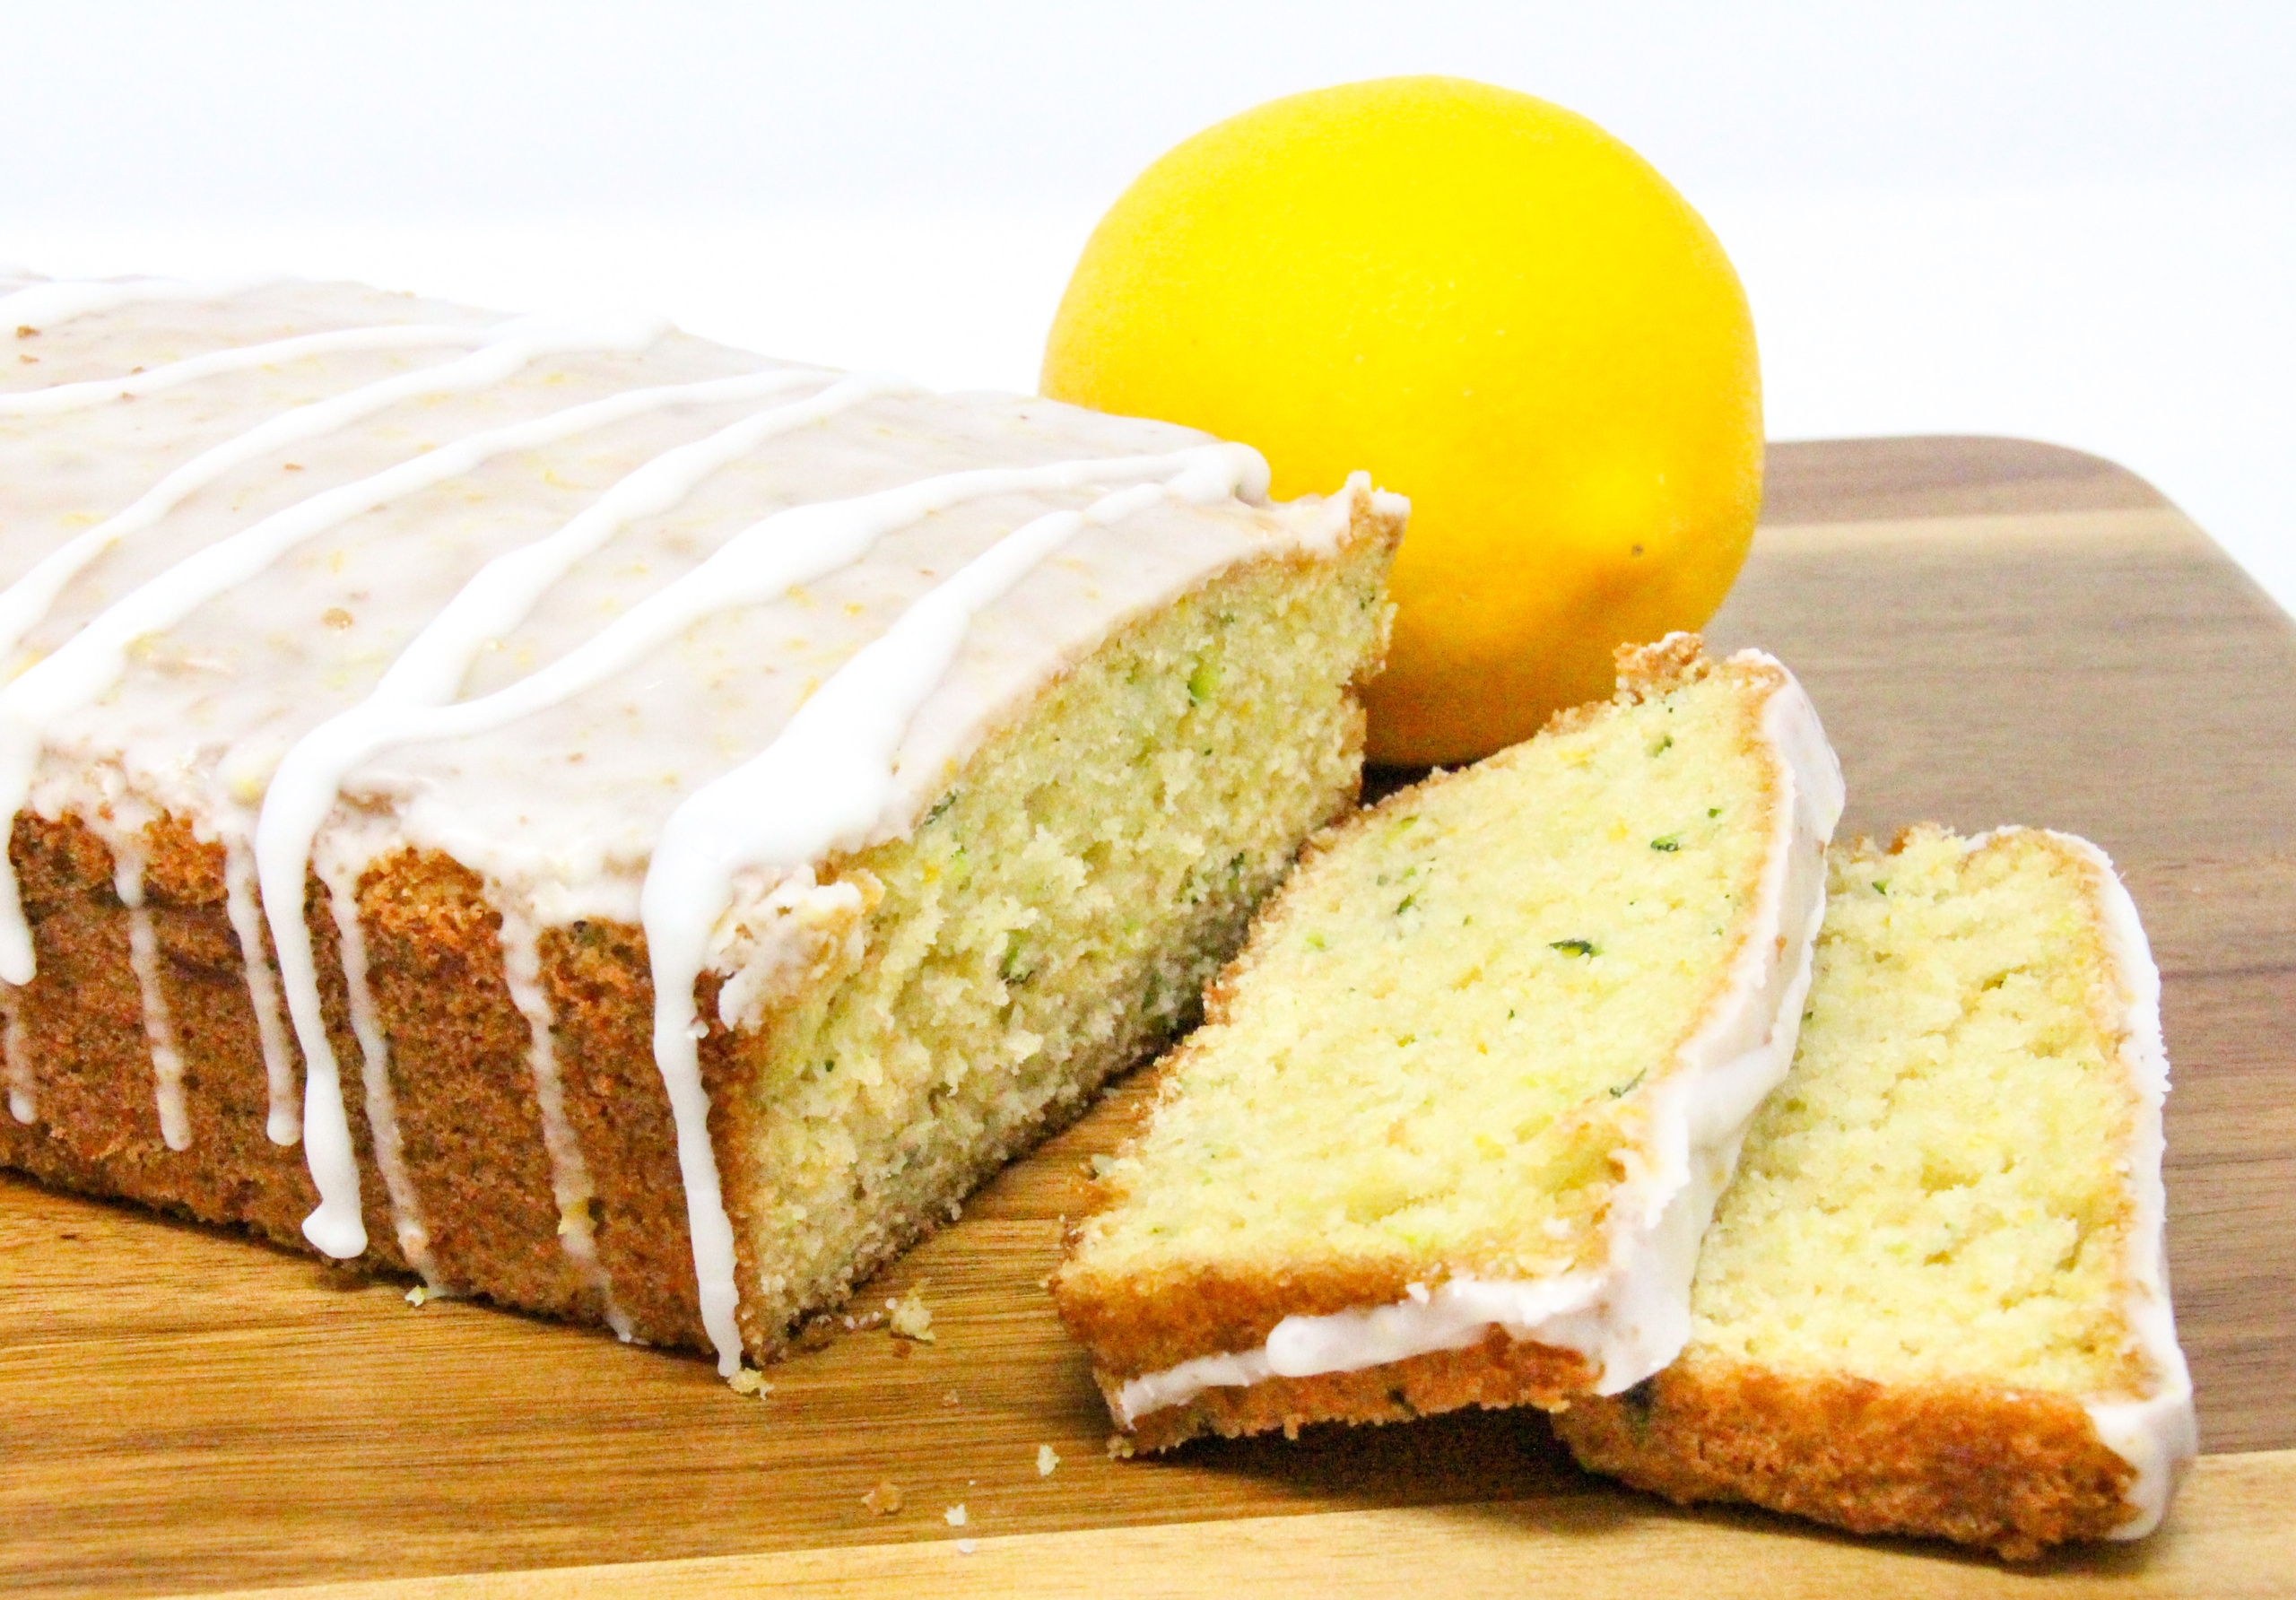 Lemon Zucchini Bread is simple to make. The lemon juice gives it a lighter flavor and the lemony glaze makes it taste indulgent. Recipe shared with permission granted by Valerie Burns, author of TWO PARTS SUGAR, ONE PART MURDER.